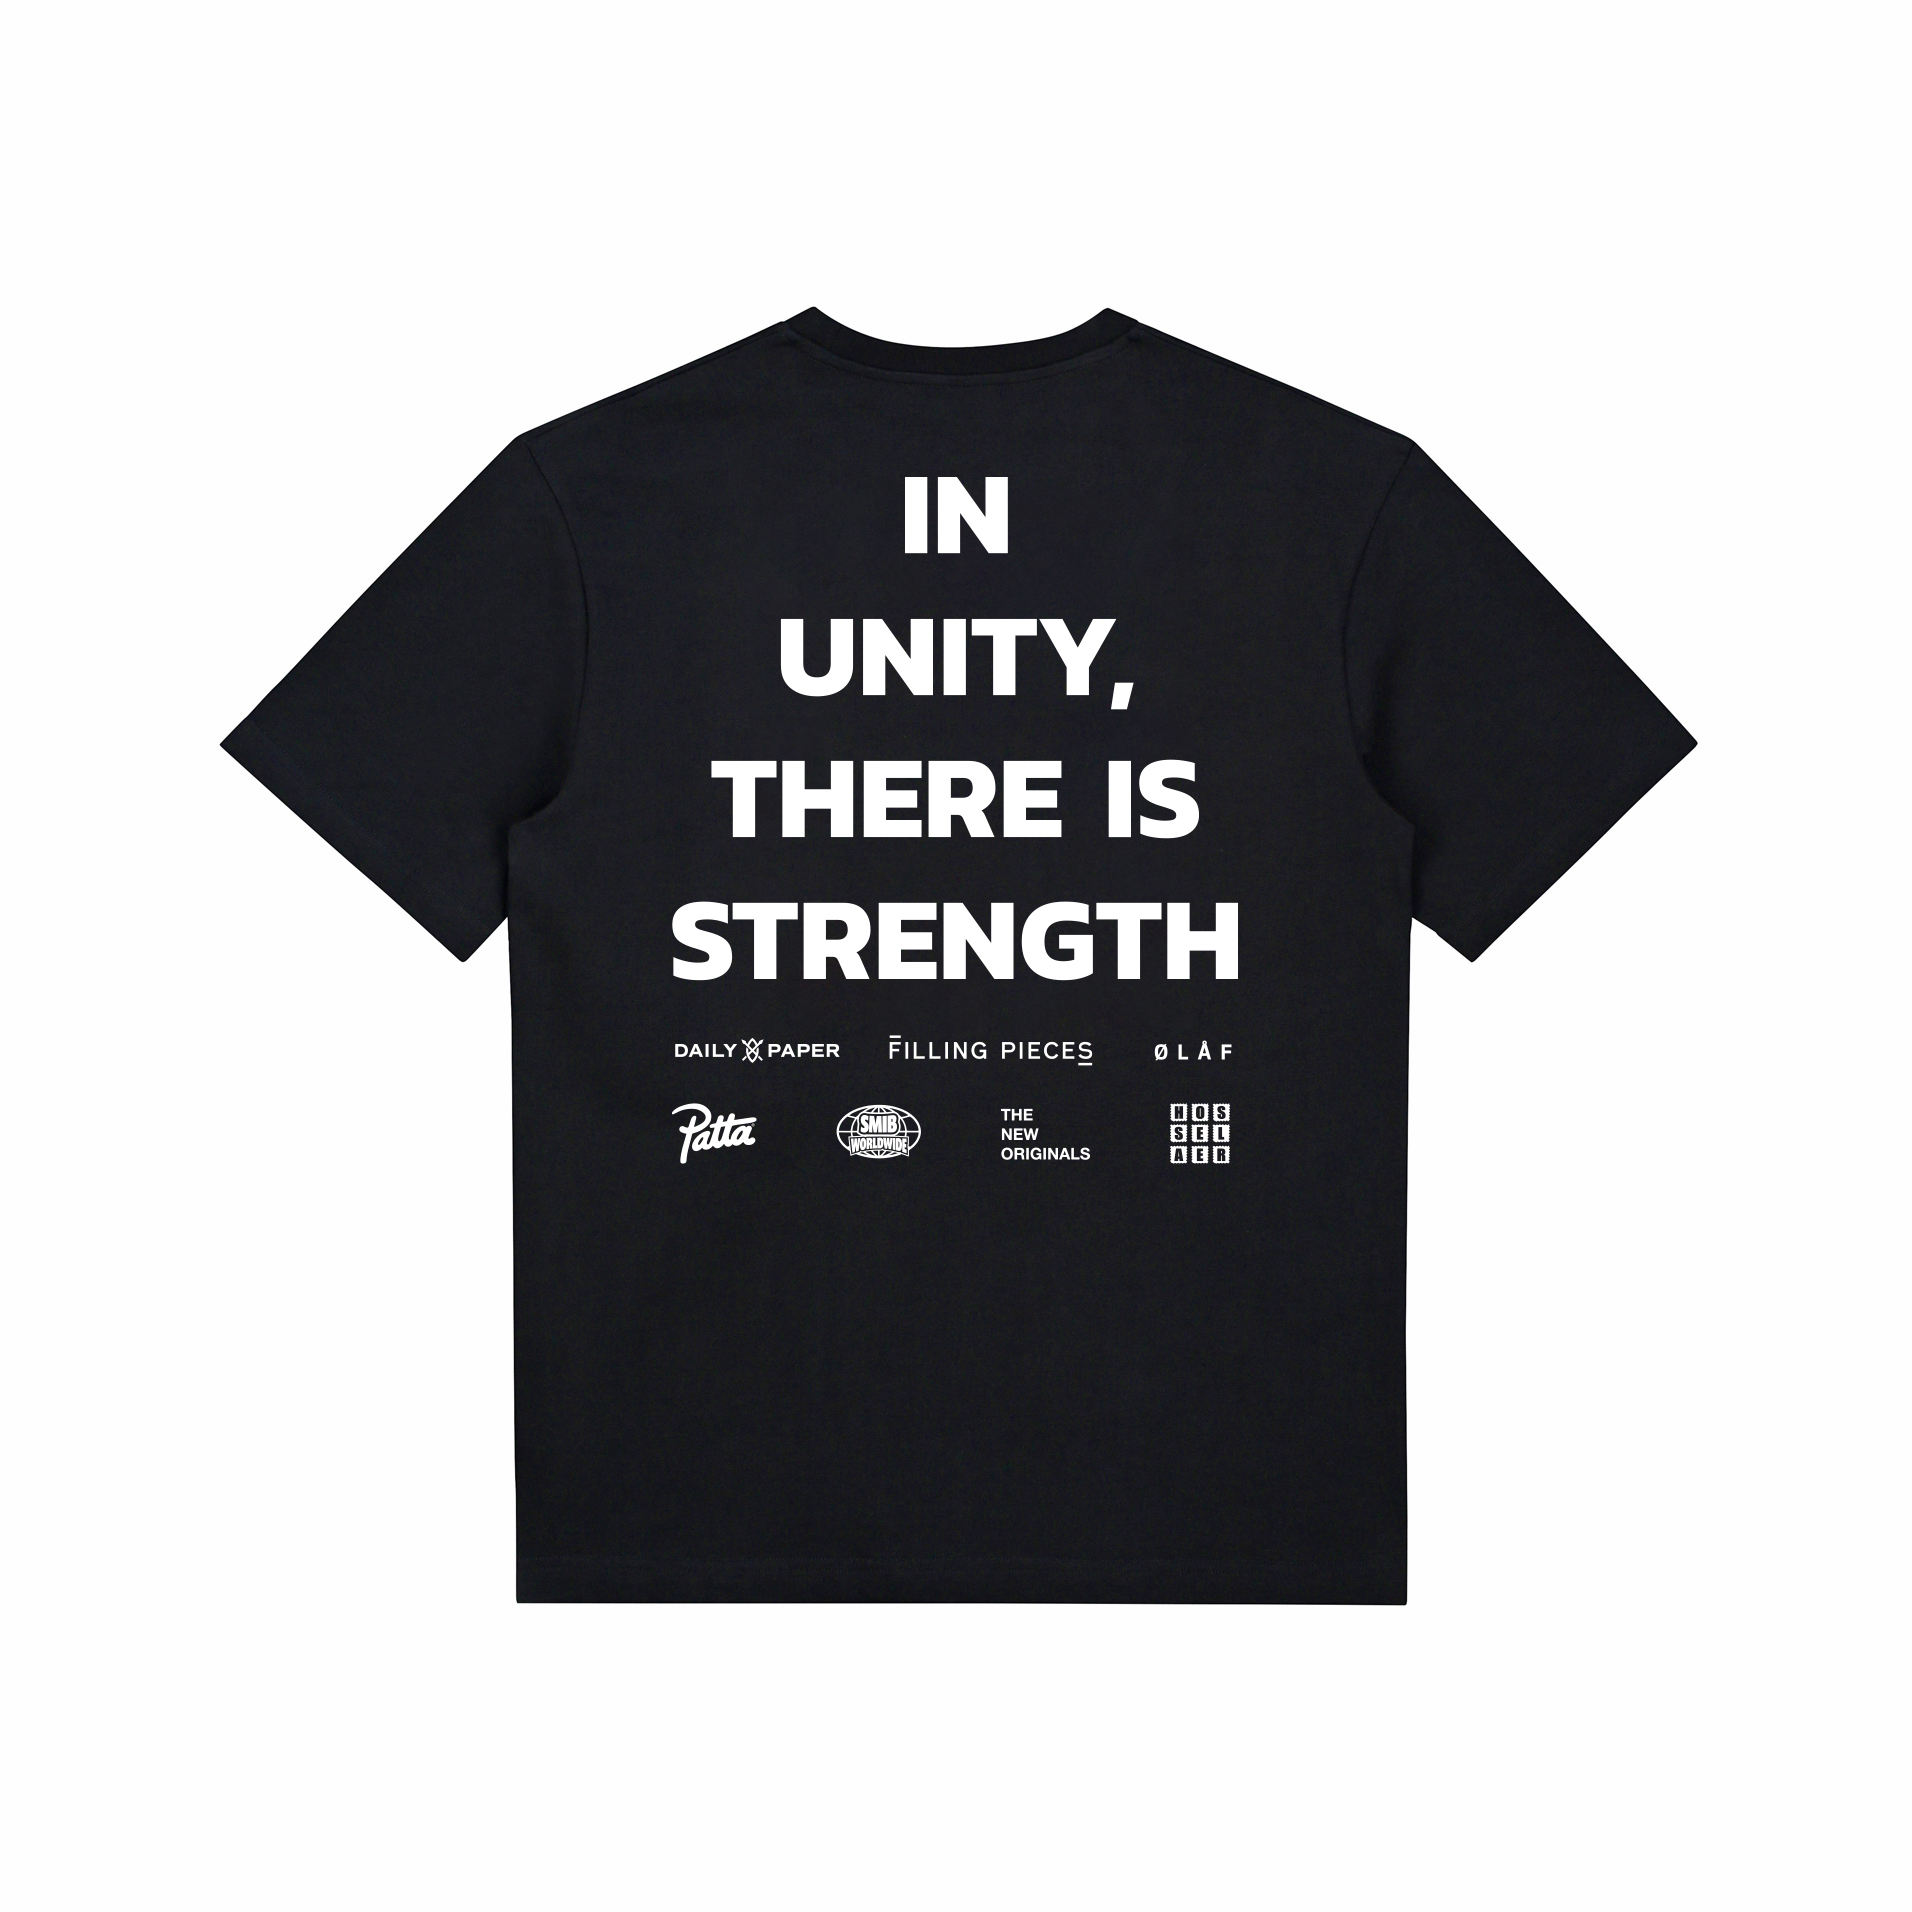 Black-Owned Amsterdam Brands unite for Charity T-Shirt